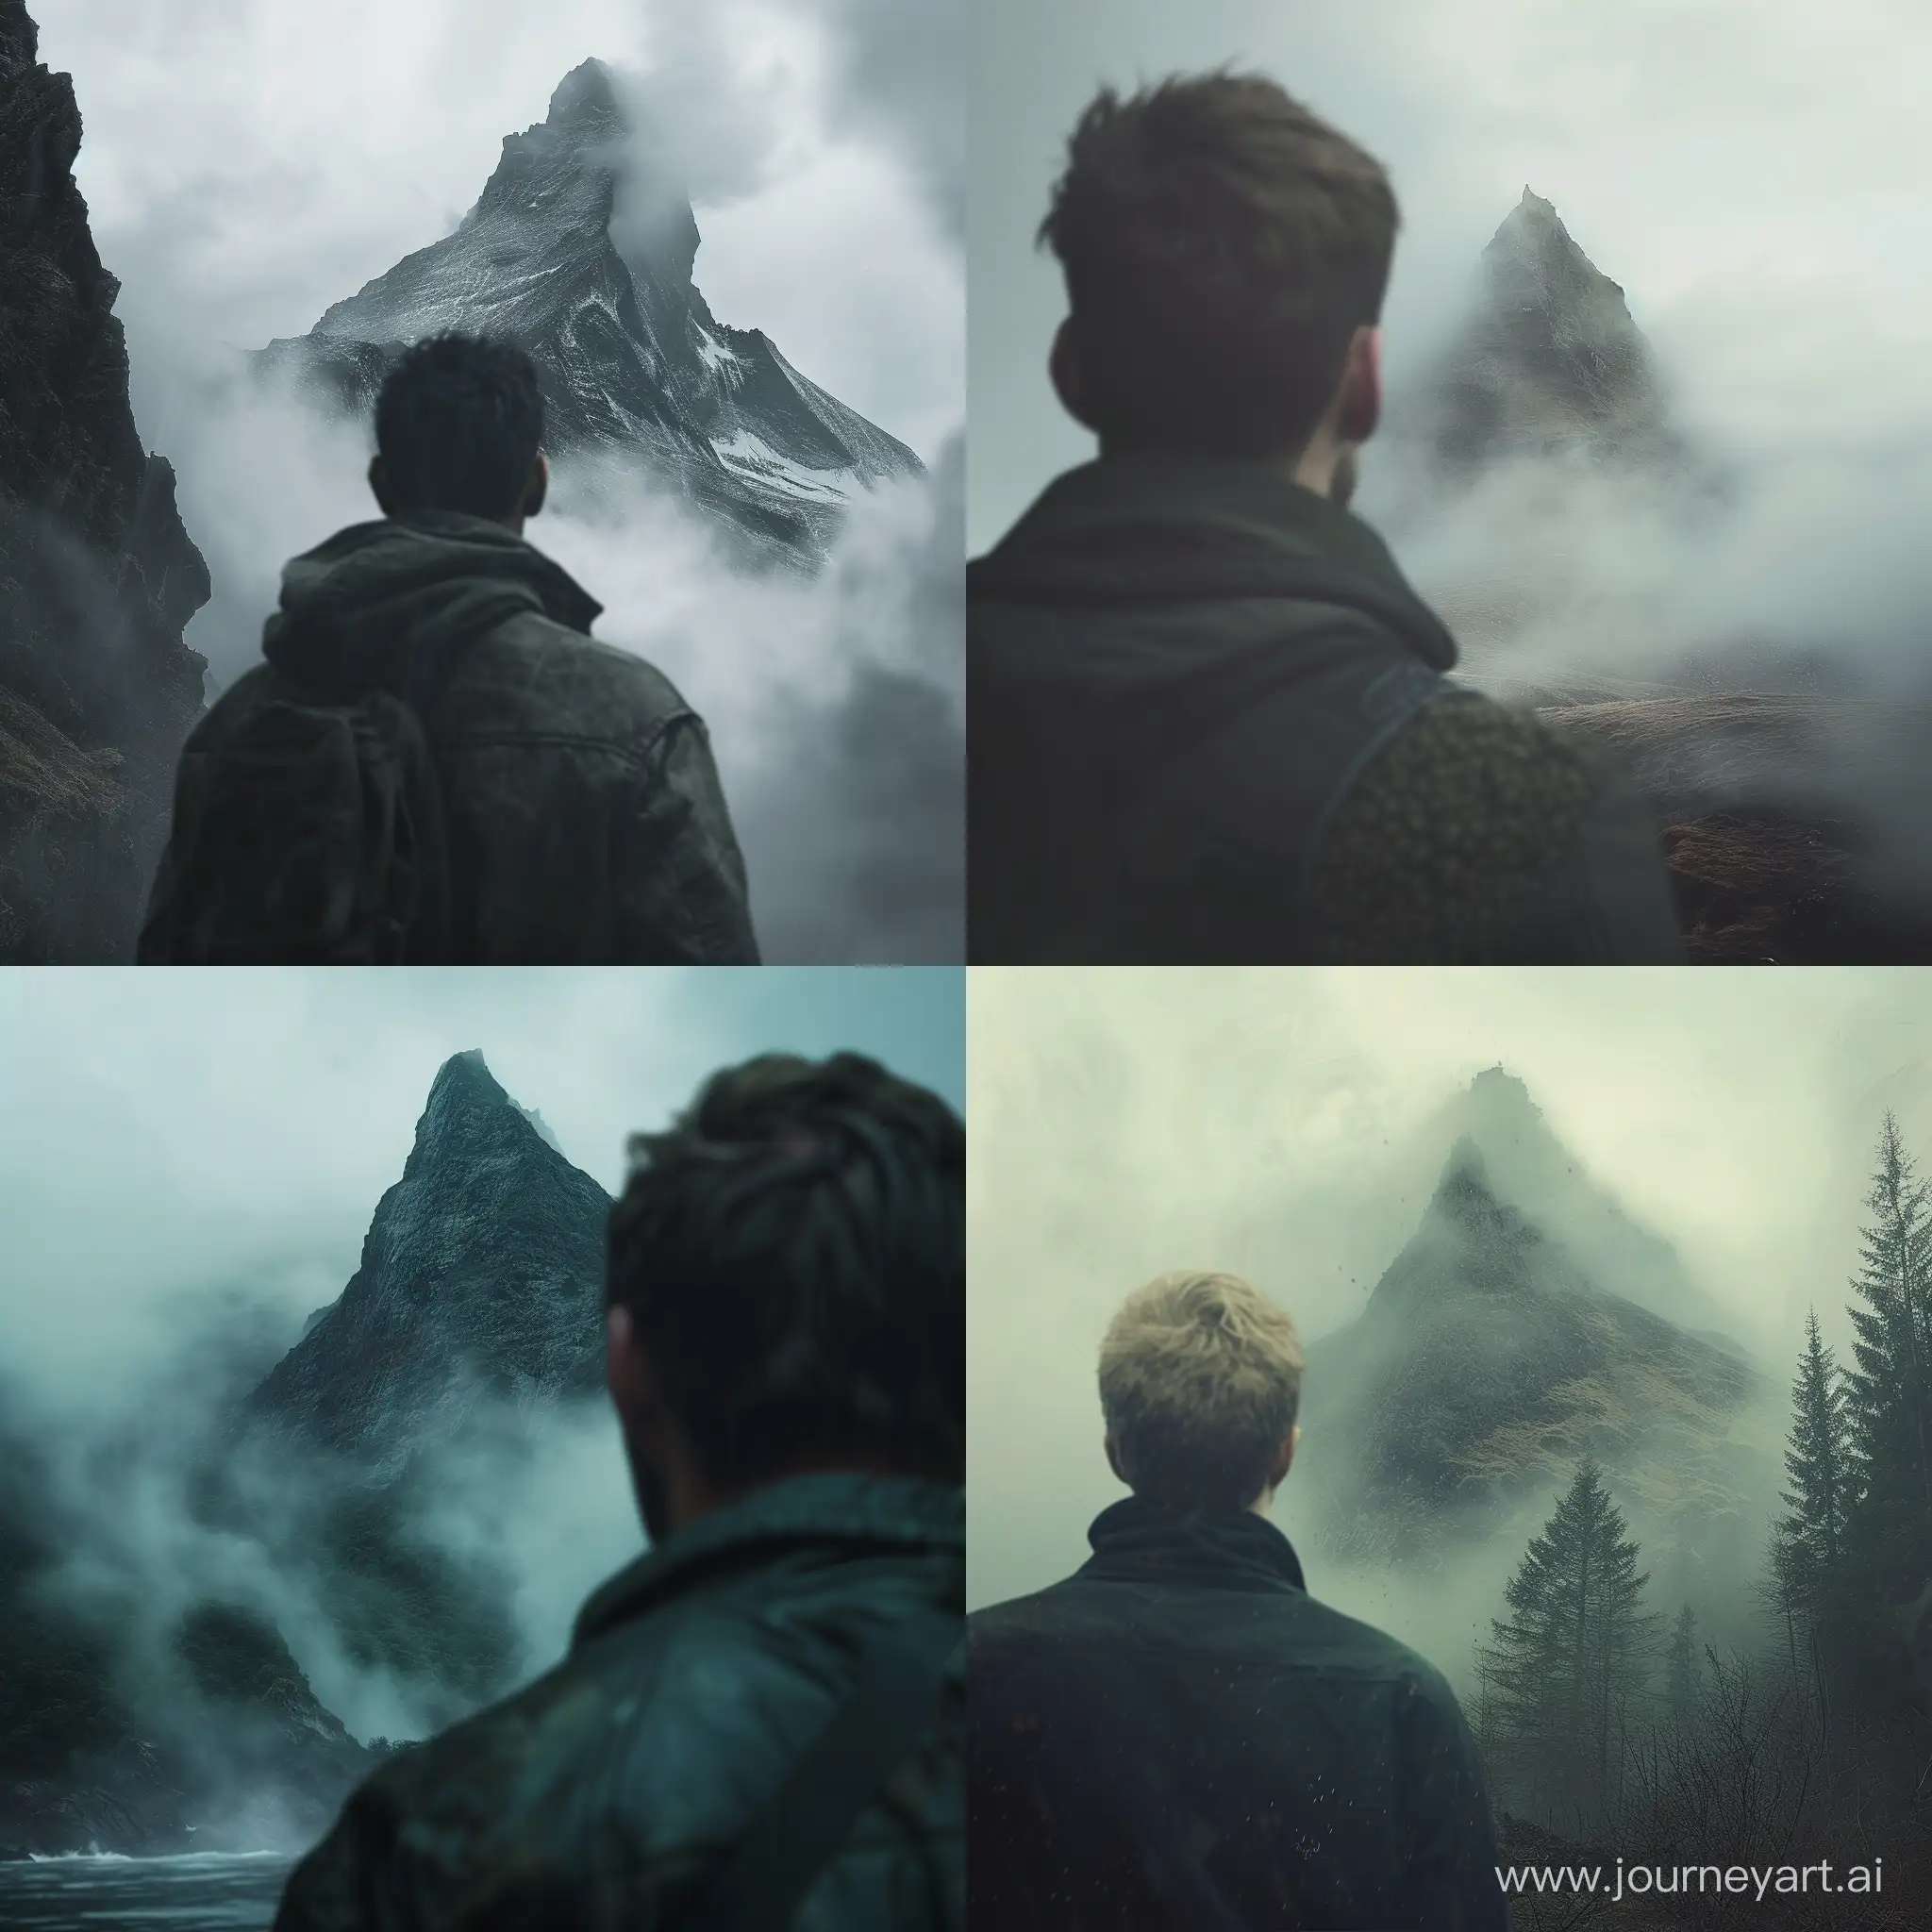 hyper real image of a man looking at a mountain hidden in the mist. 